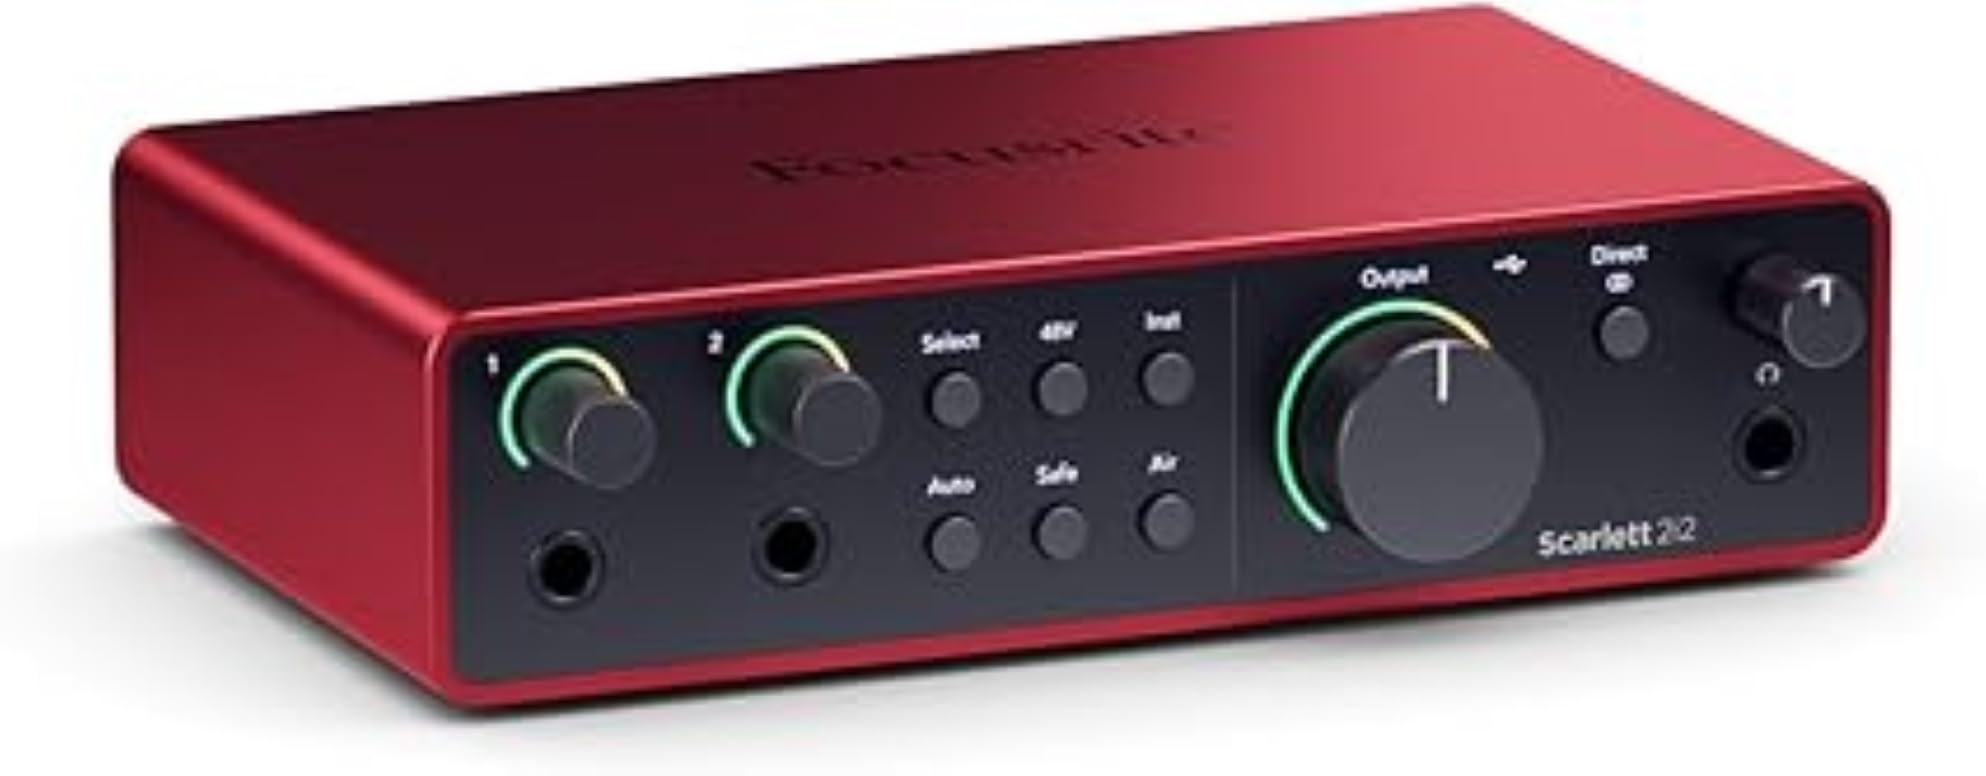 Focusrite Scarlett 2i2 4th Gen, USB audio interface for recording, composing, streaming, and podcaster - sound recordings and all the software to record